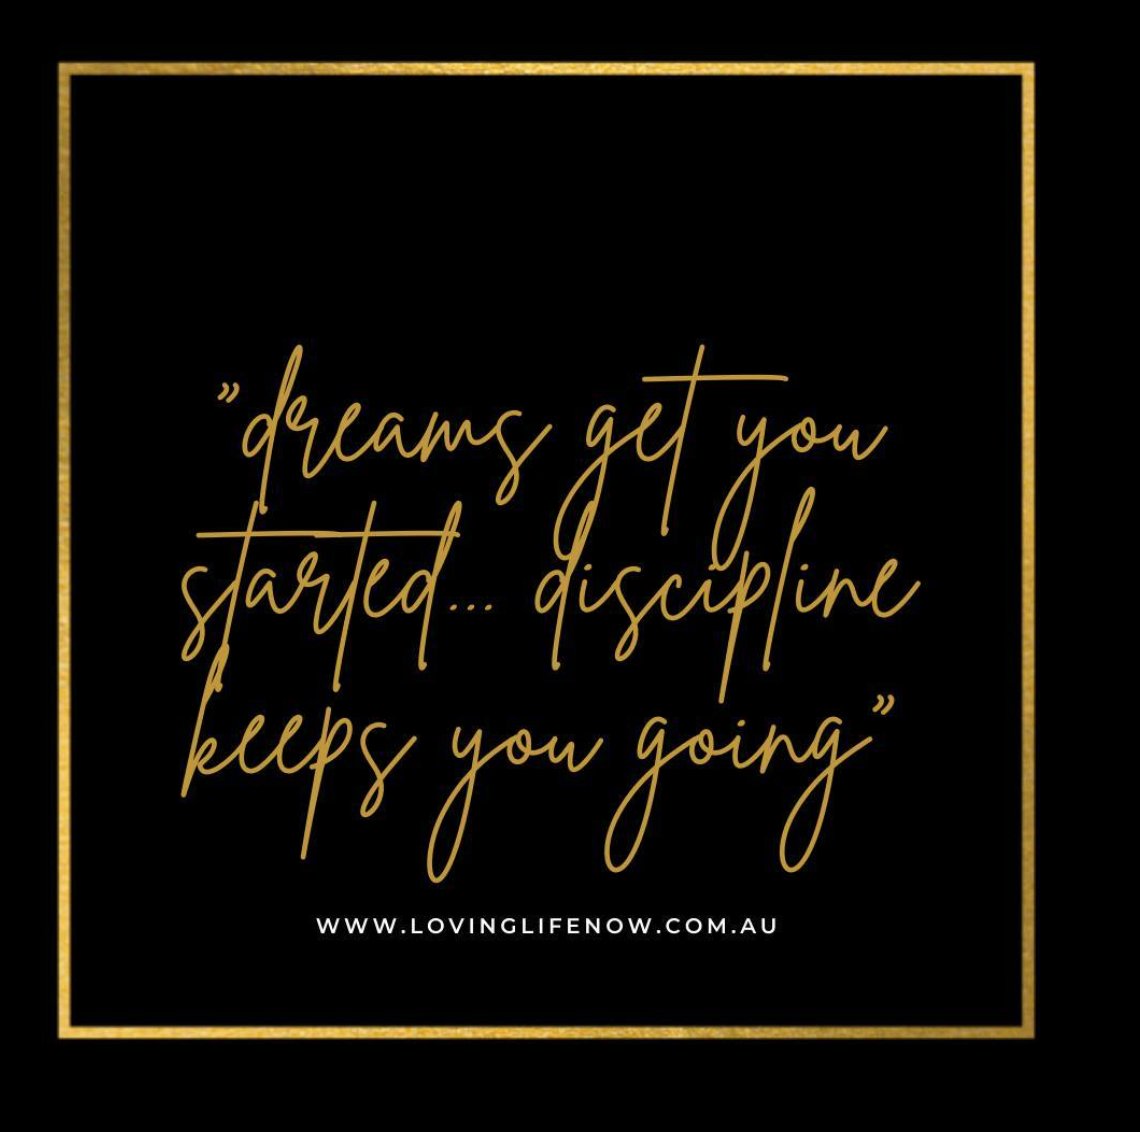 Dreams get you started... discipline keeps you going - - #LivingLovingLife #OnlineIncomeOpportunity #WorkFromAnywhere #OnlineBusinessSolution #SimonAndLeeAnne #LifestyleLoveAndBeyond #LaptopLifestyle #PortableOnlineBusiness #SimonHaggard #LeeAnneHaggard #LovingLifeNow